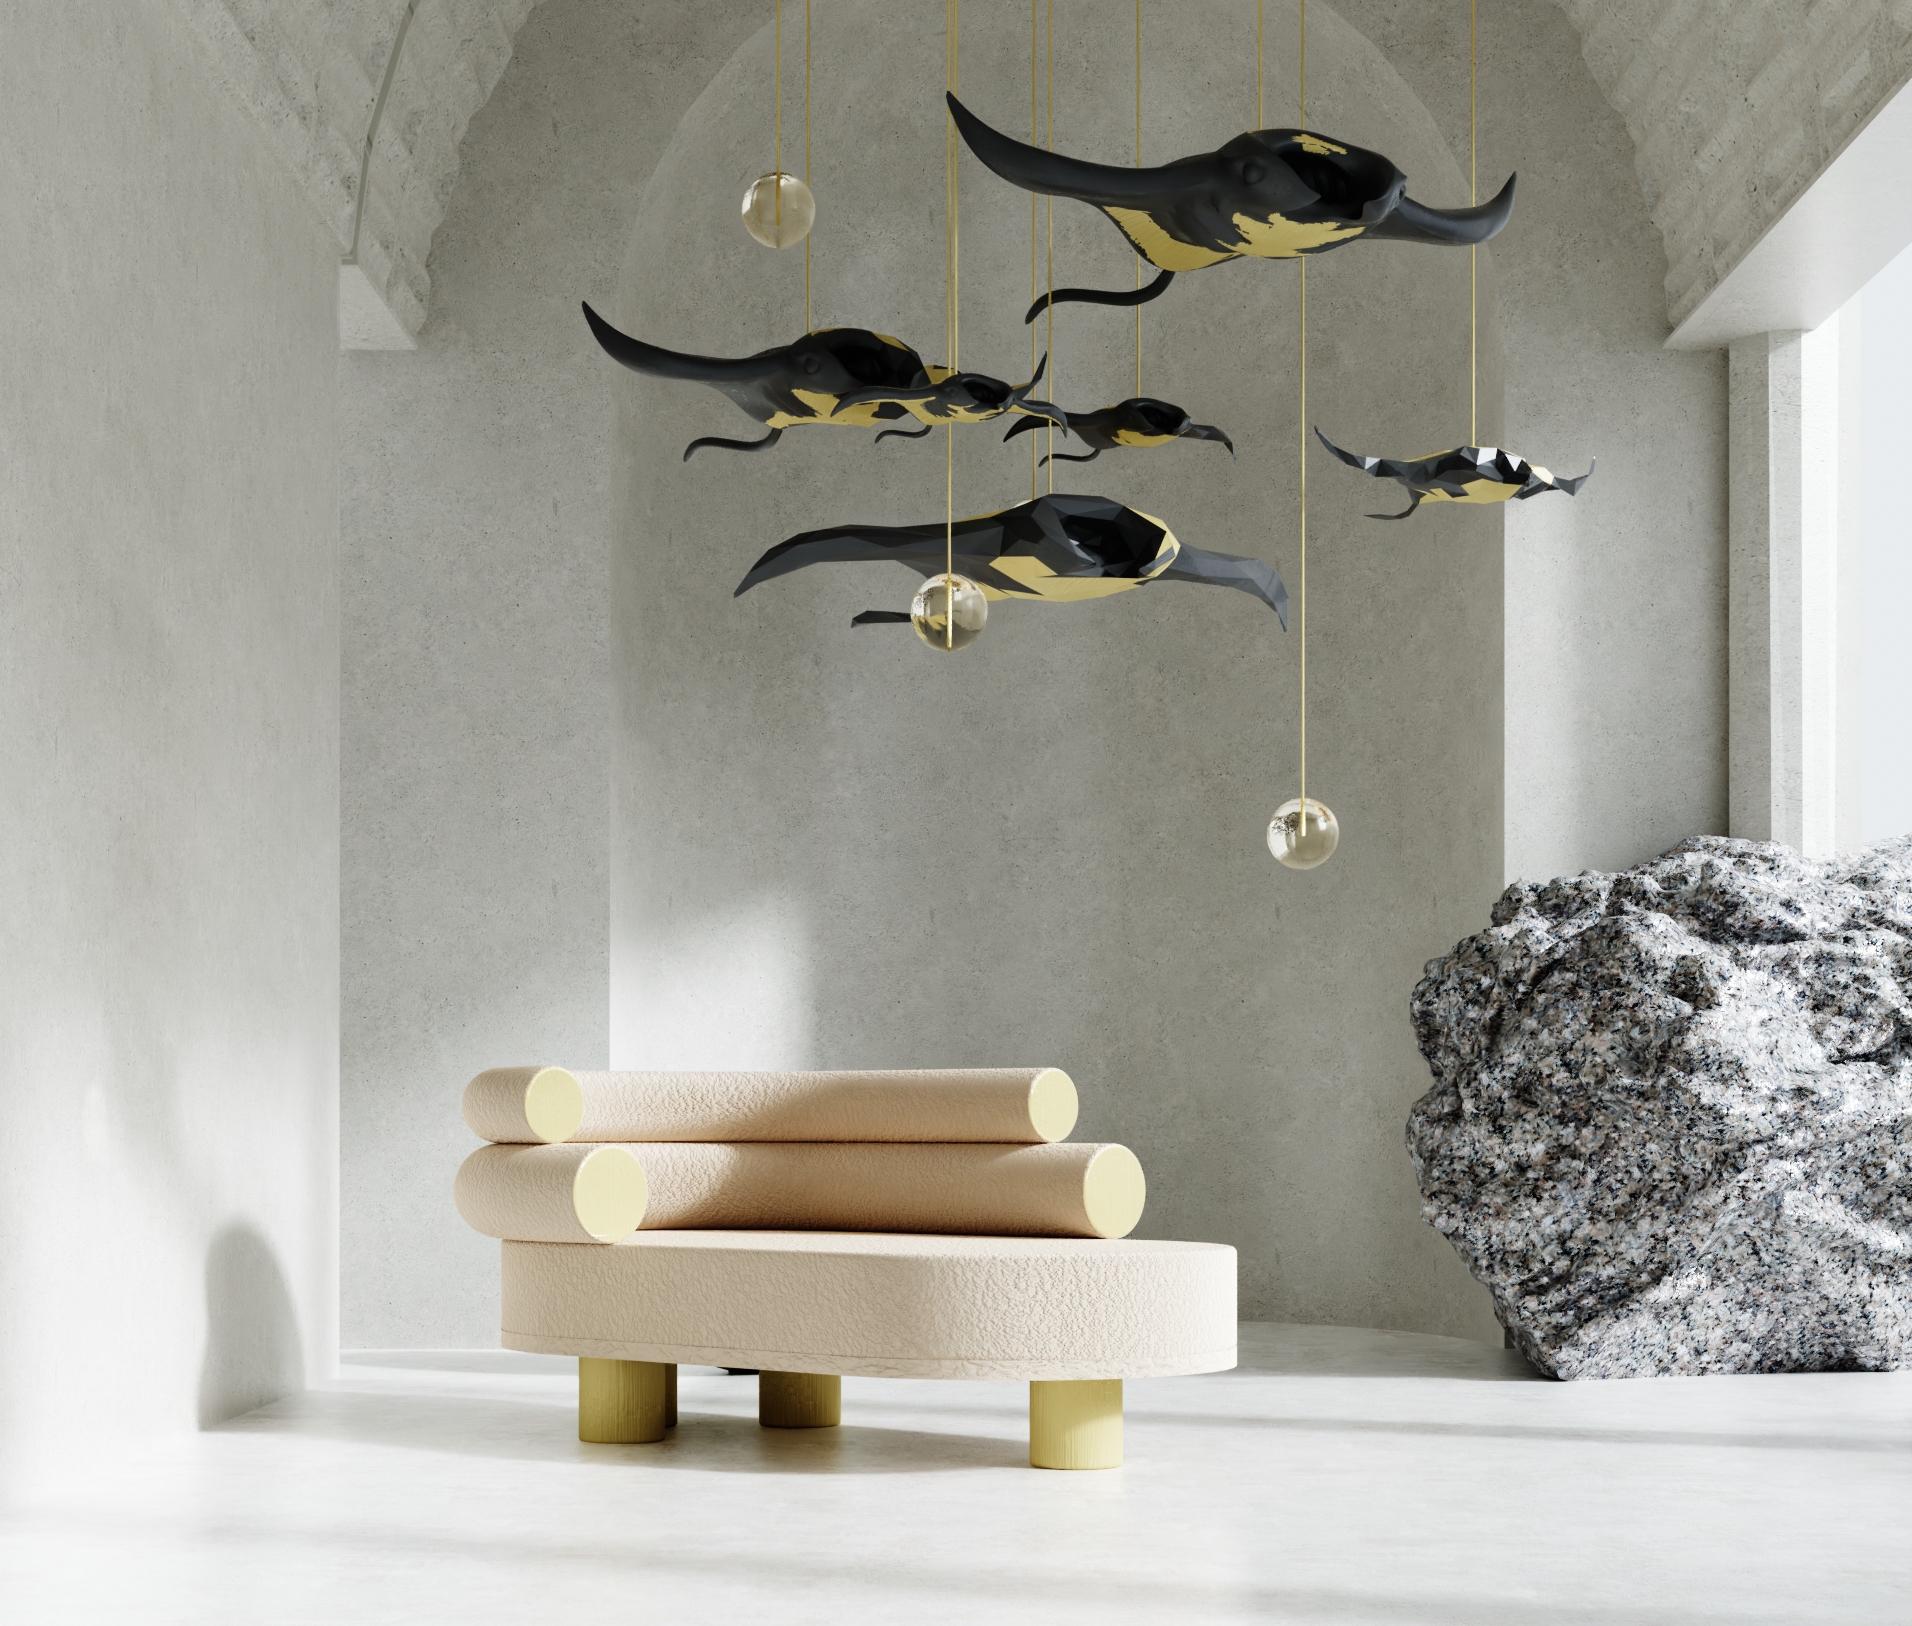 Large Mantas Ray chandelier by Kasadamo
PROJECT WITH PANT
Edition of 10
Dimensions: 280 cm³
Materials: 3D print development, bio-plasty, bio resin, linen fiber, metal finishes when necessary.
Available in other size: 120 cm³

All our lamps can be